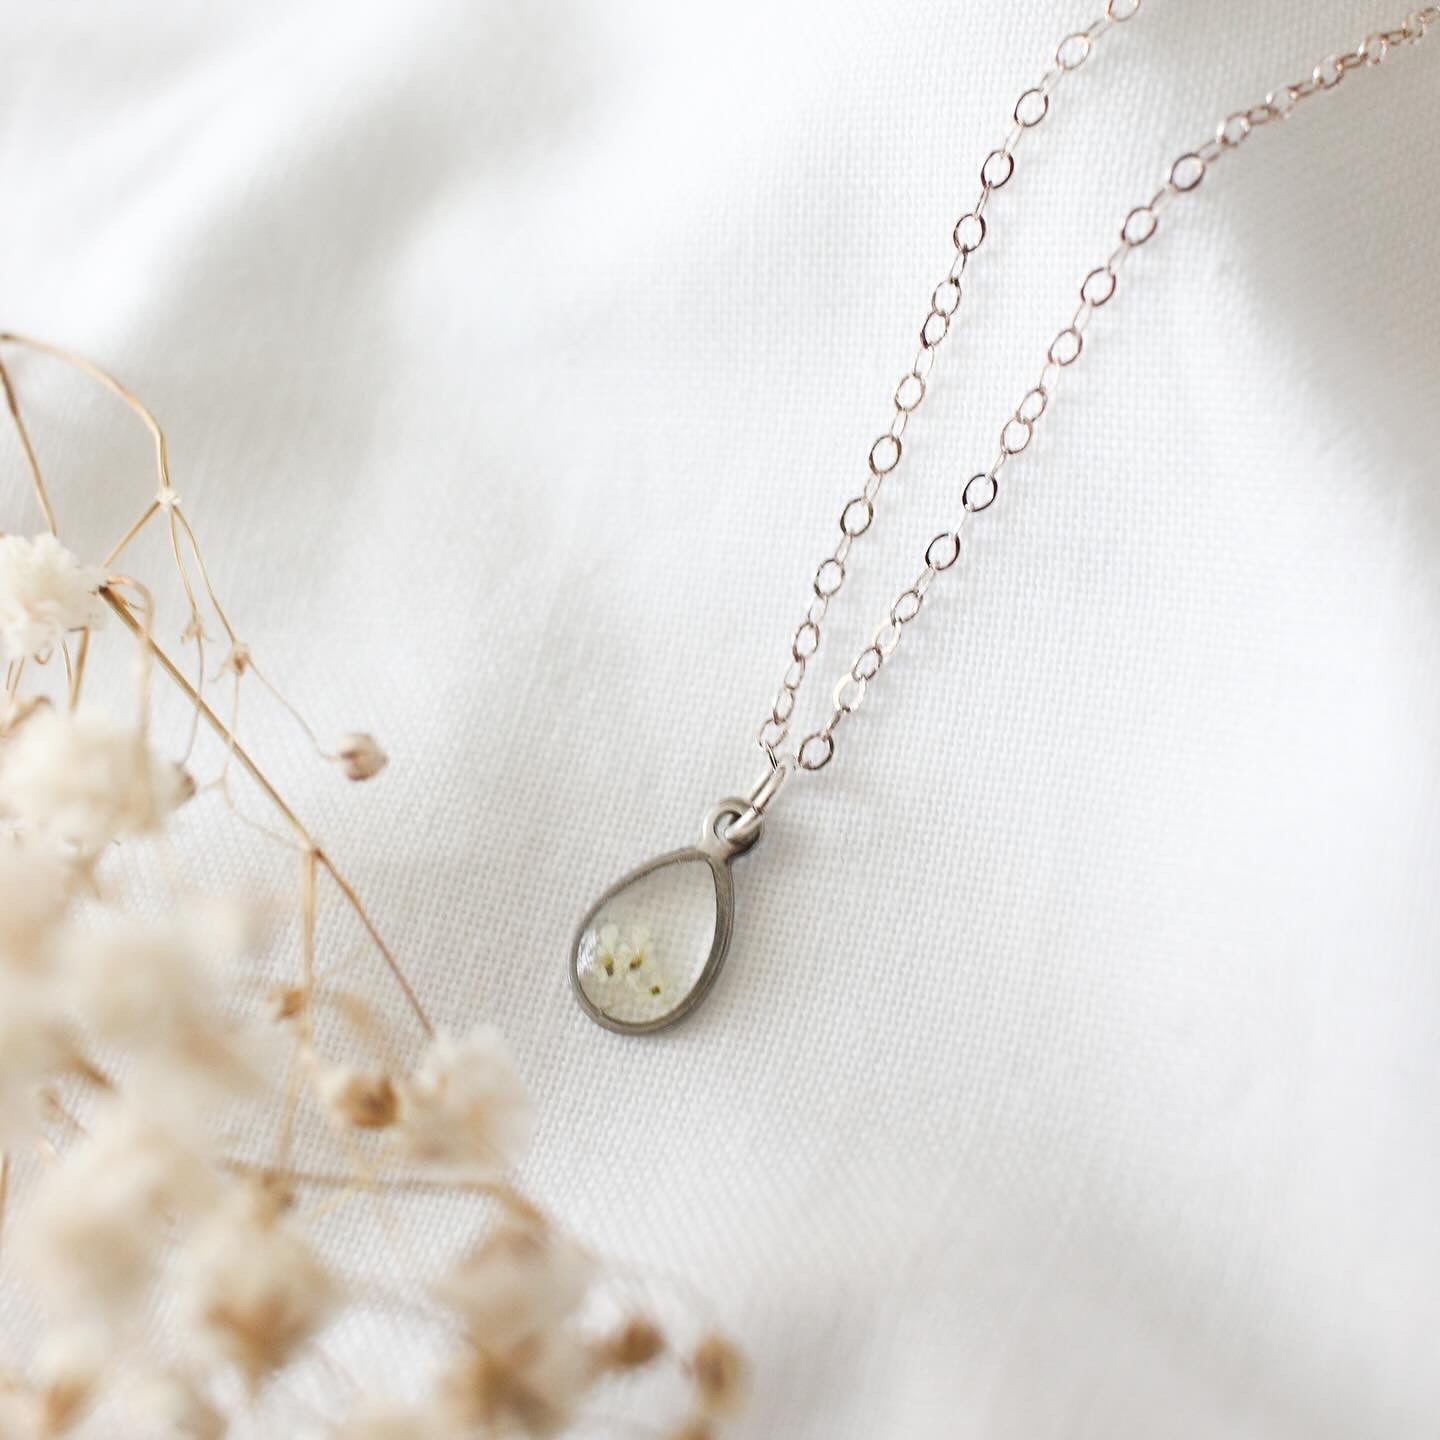 Silver Raindrop Queen Anne's Lace Necklace